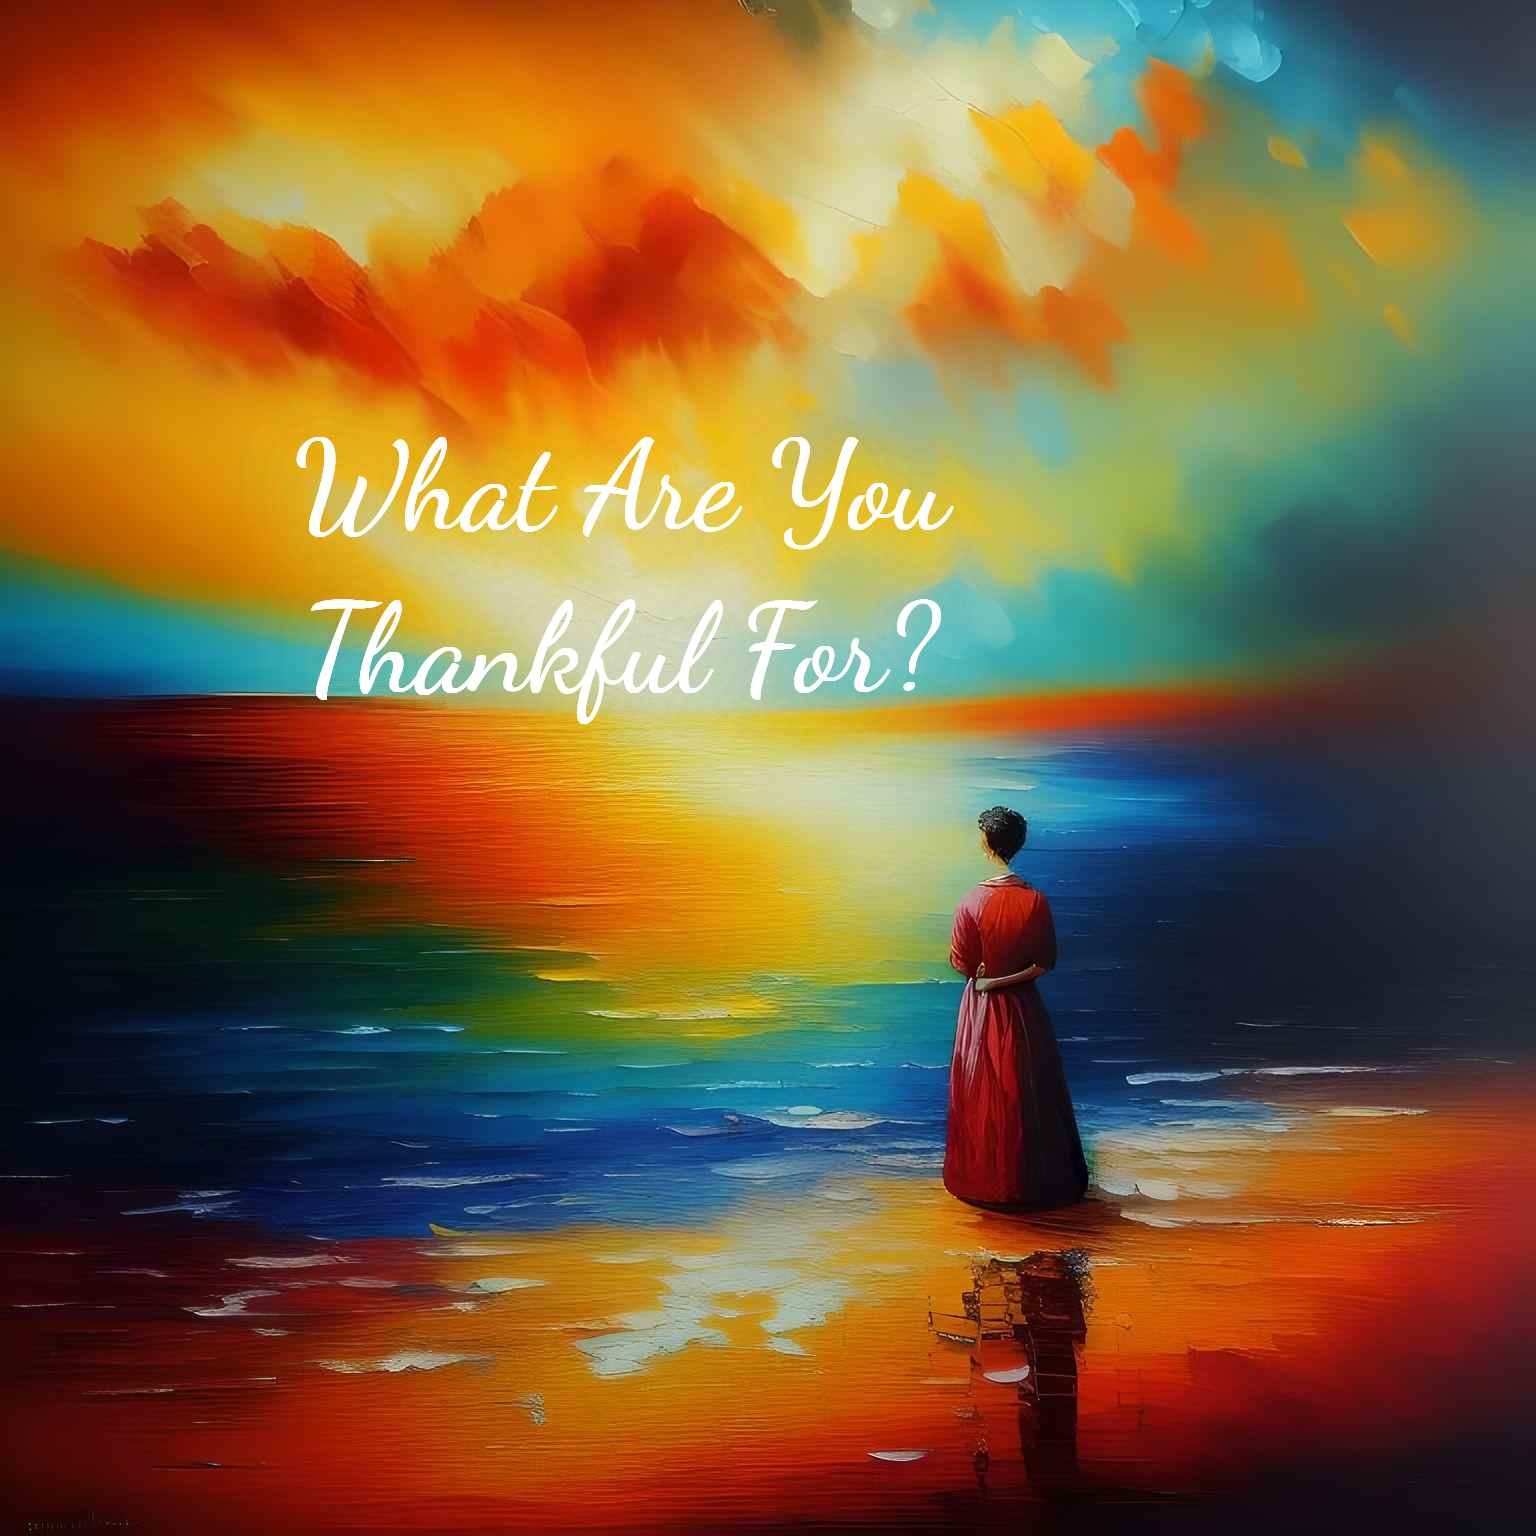 what are you thankful for